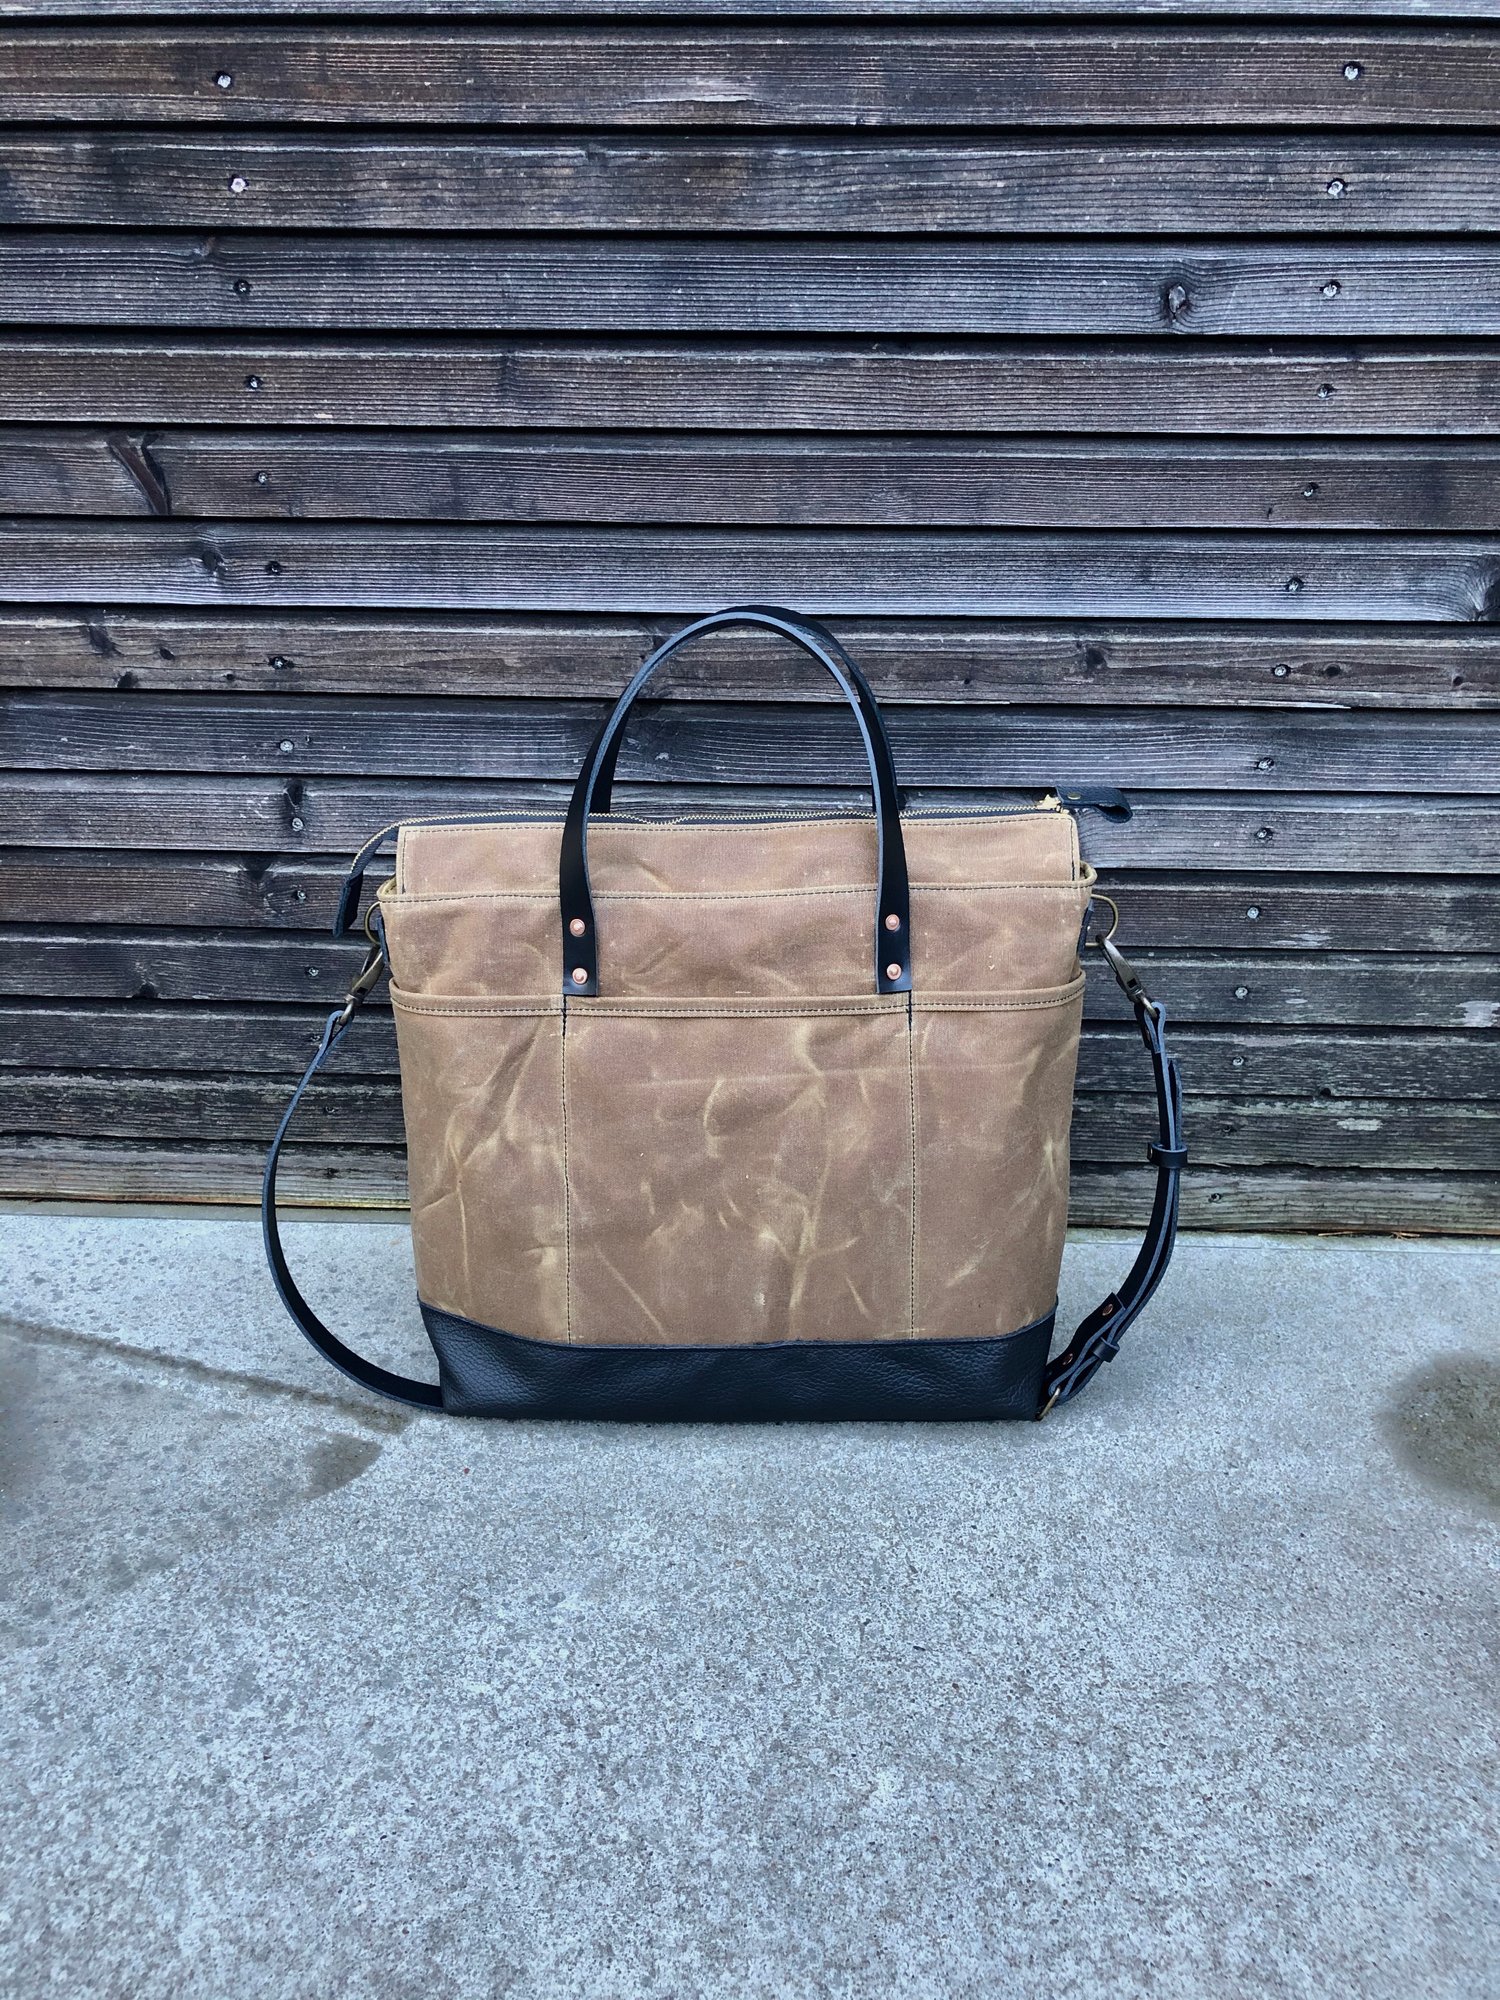 Image of Office tote bag in waxed canvas with luggage handle attachment leather handles and shoulder strap